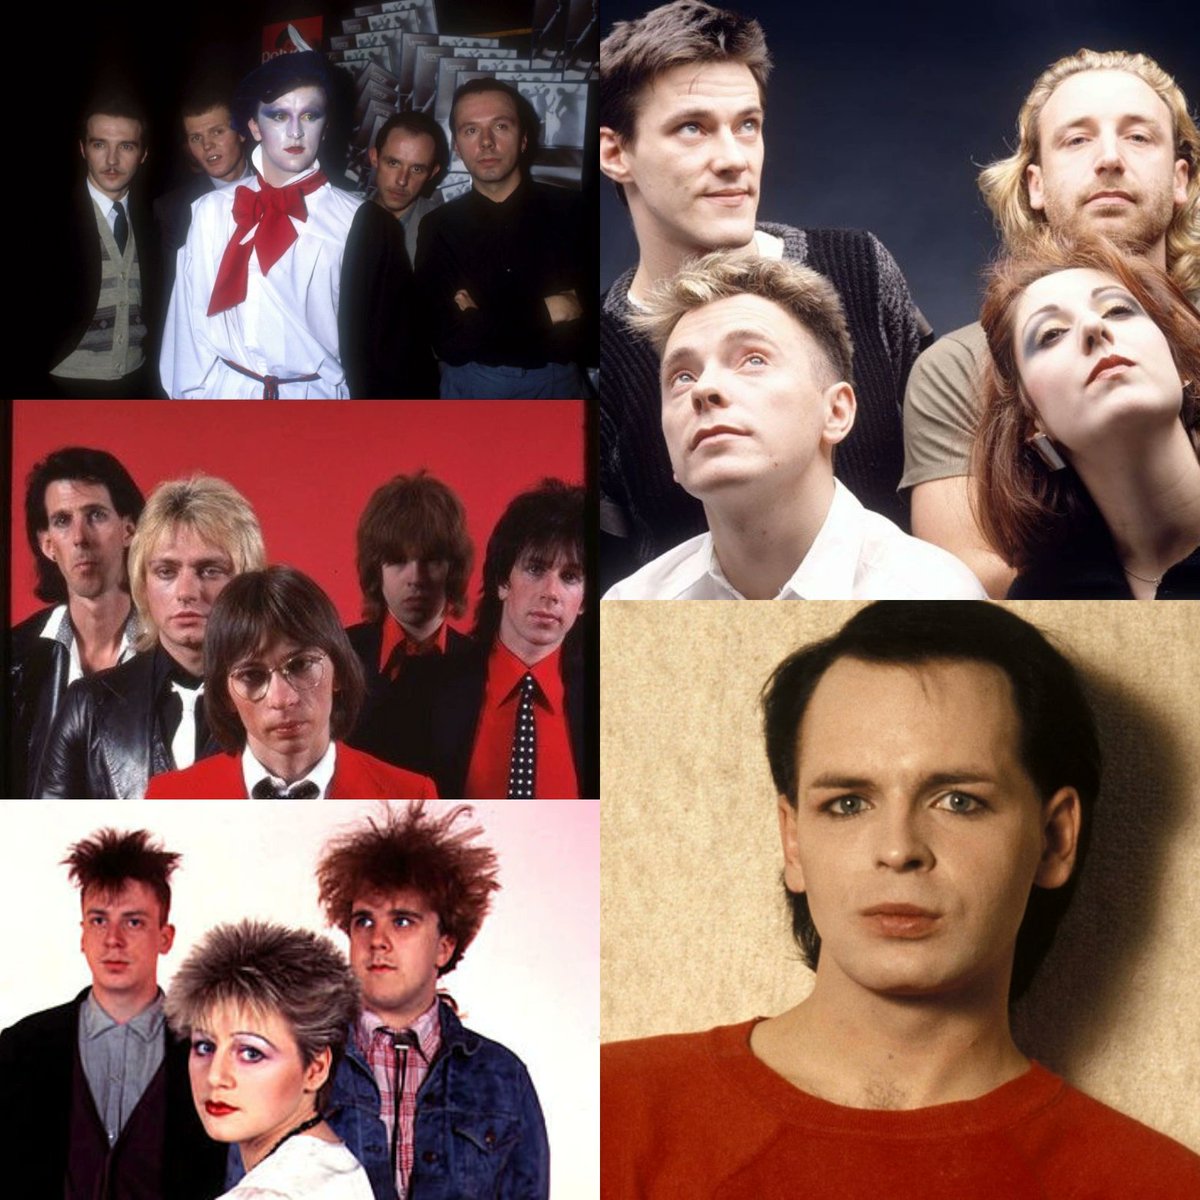 Hey #moefos hope you're having a good weekend & get to join me tonight at 9 pm on 91.3 @kbcs for 2 hours of awesome #80smusic including #visage #theCars #cocteauTwins #newOrder #garyNuman & lots more. See you there!